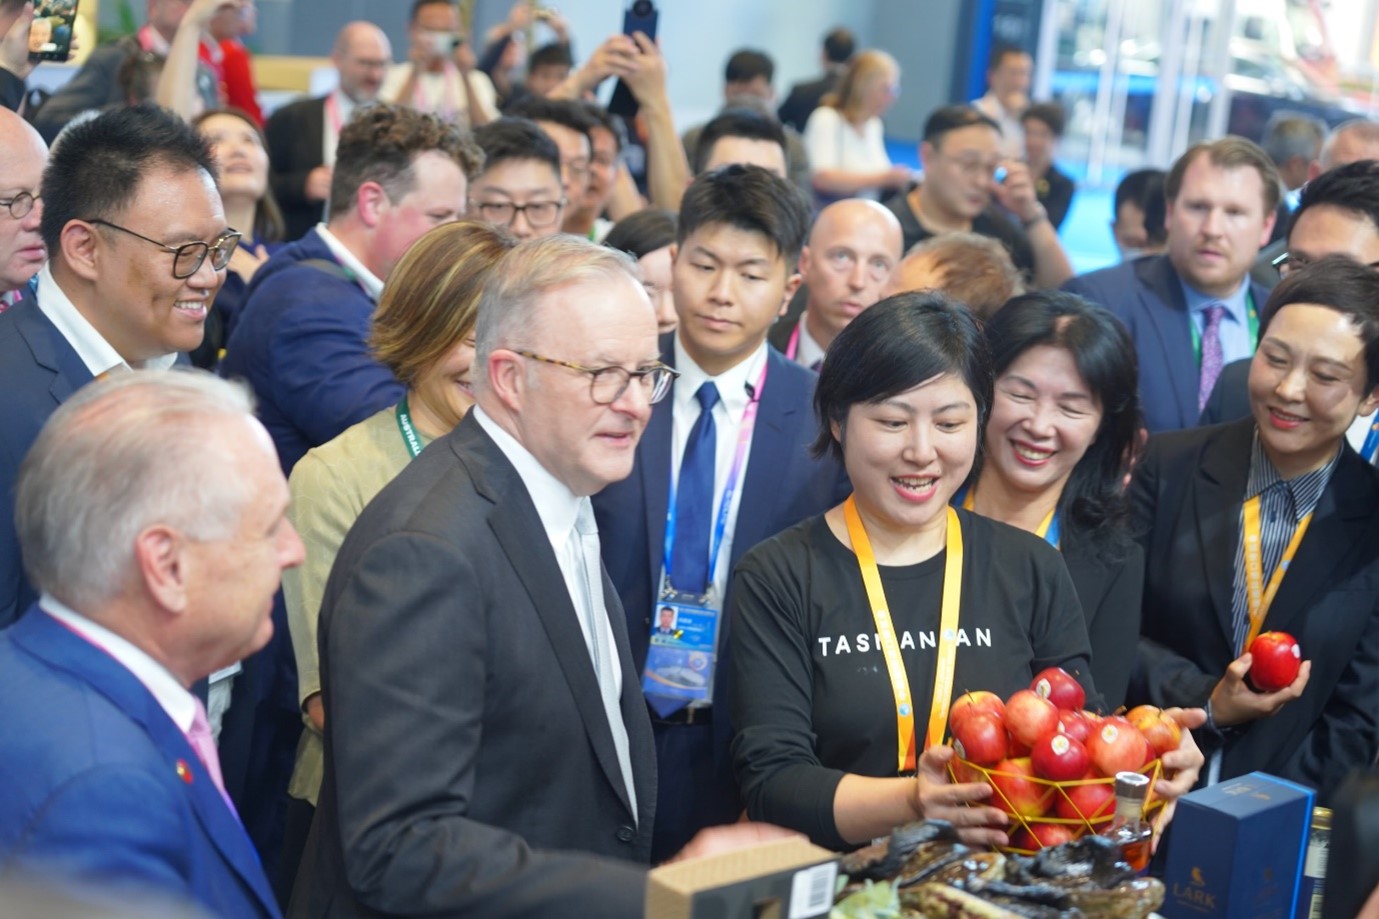 Prime Minister Anthony Albanese and Don Farrell, Minister for Trade with Vivian Zhao and a basket of Tasmanian Tiger Fuji apples.